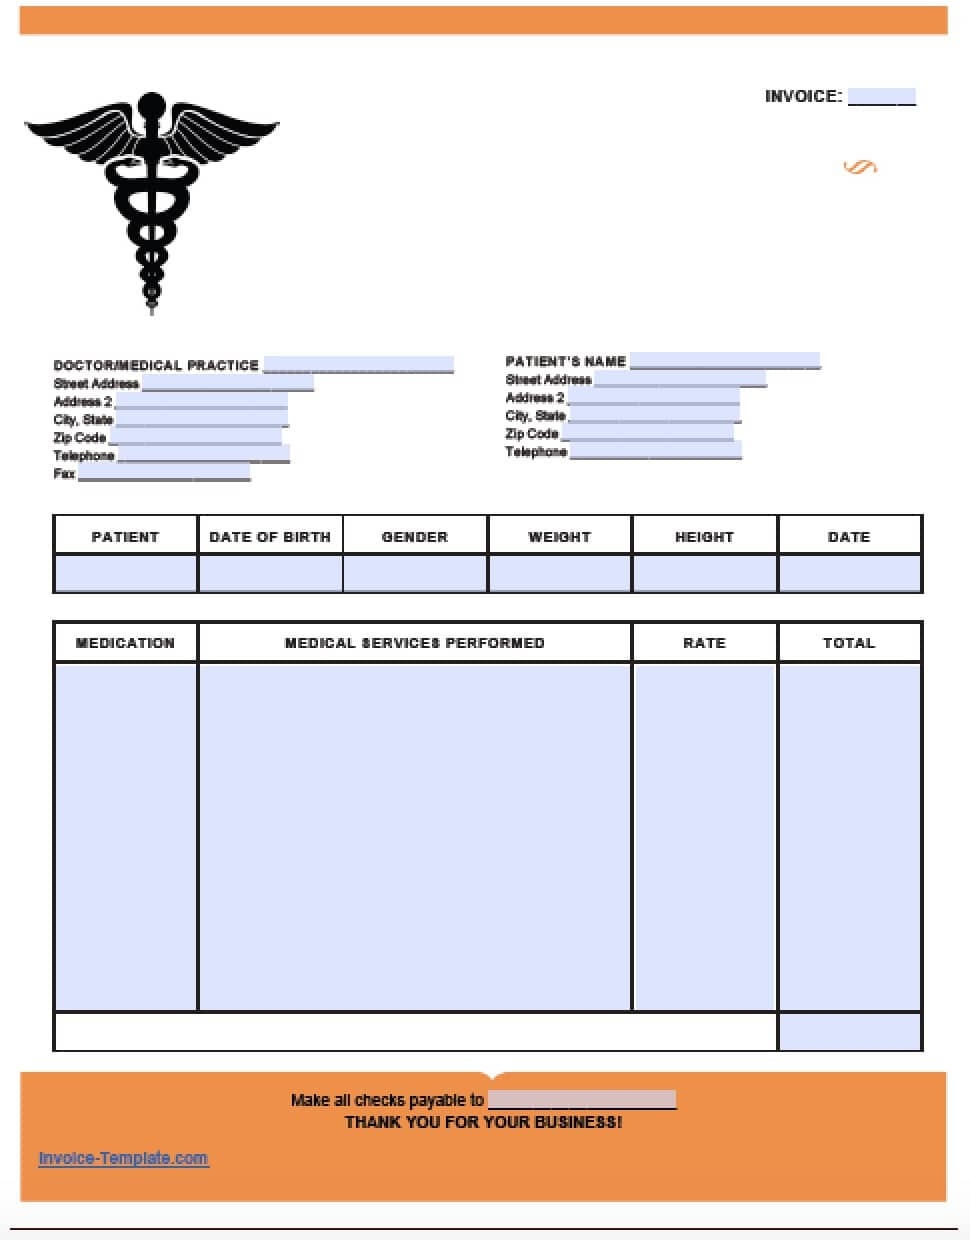 free medical invoice template excel pdf word doc medical invoice sample